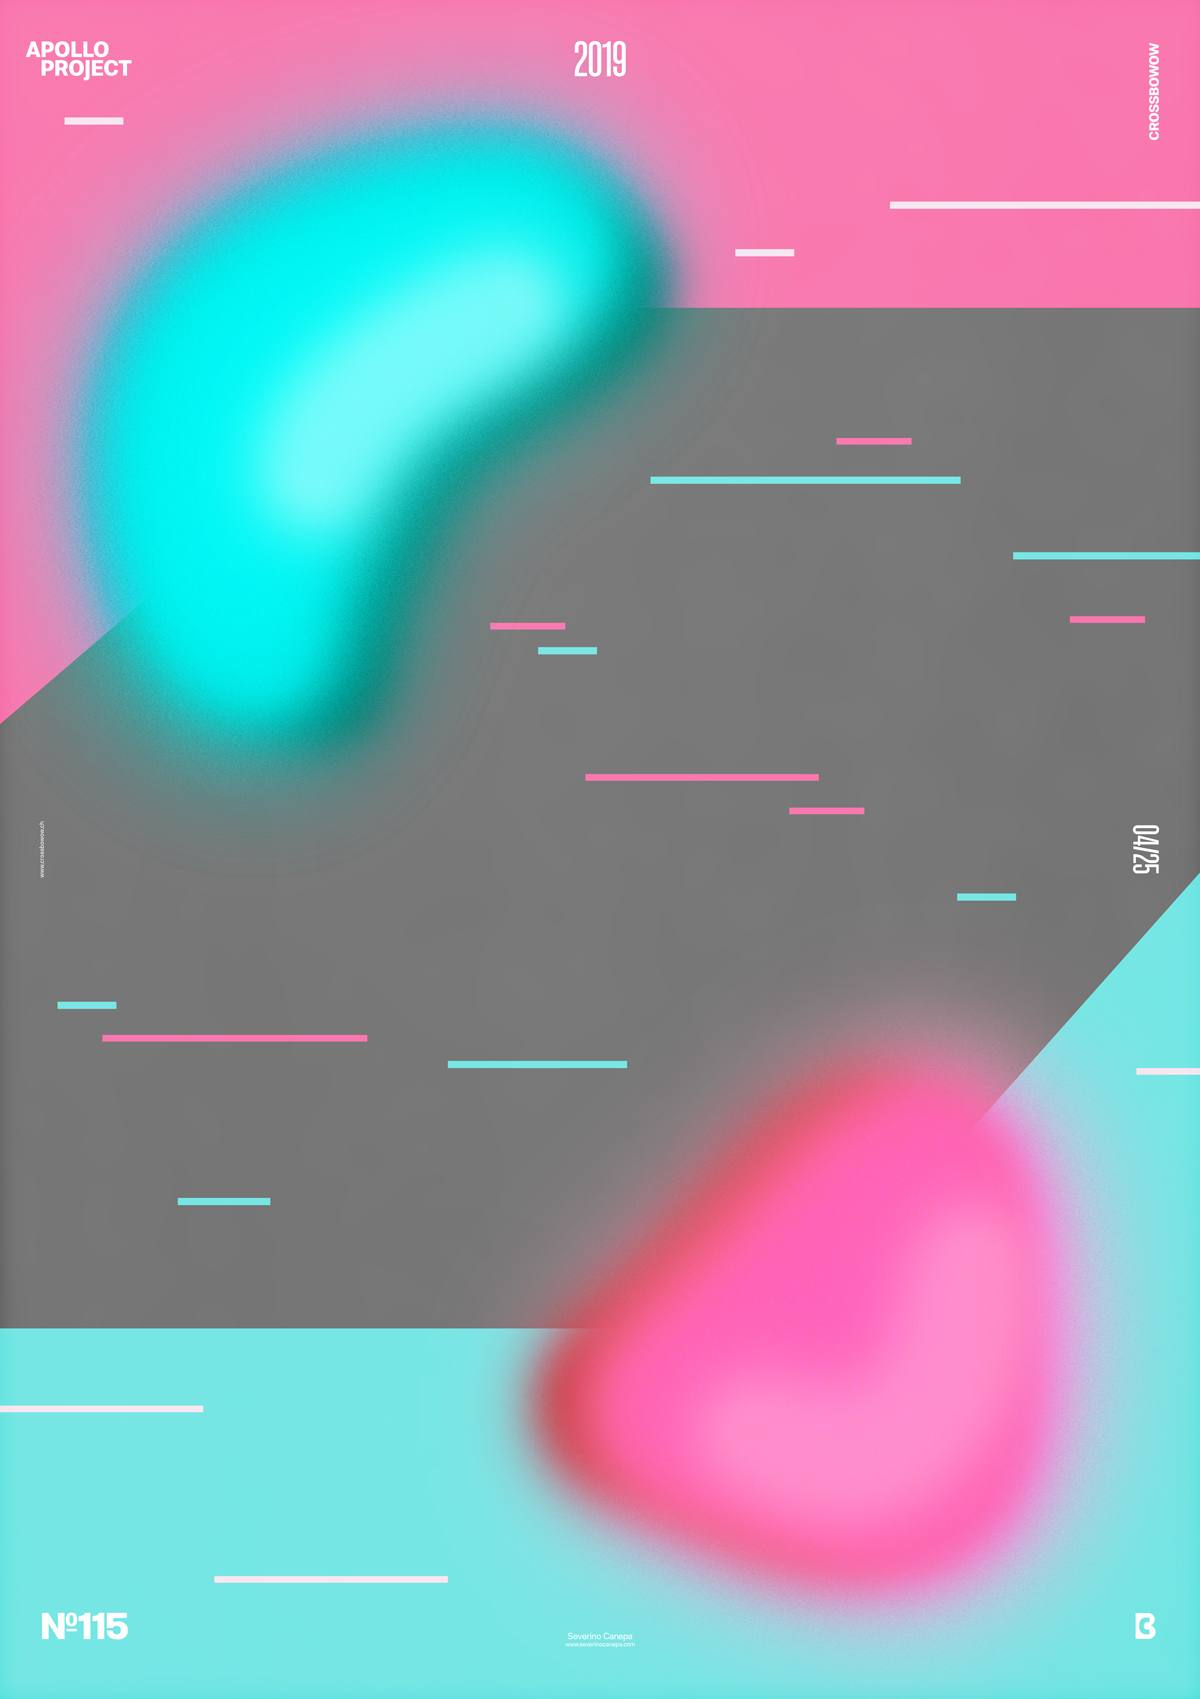 Visual of the poster #115 Attraction made of two blurry forms in pink and blue